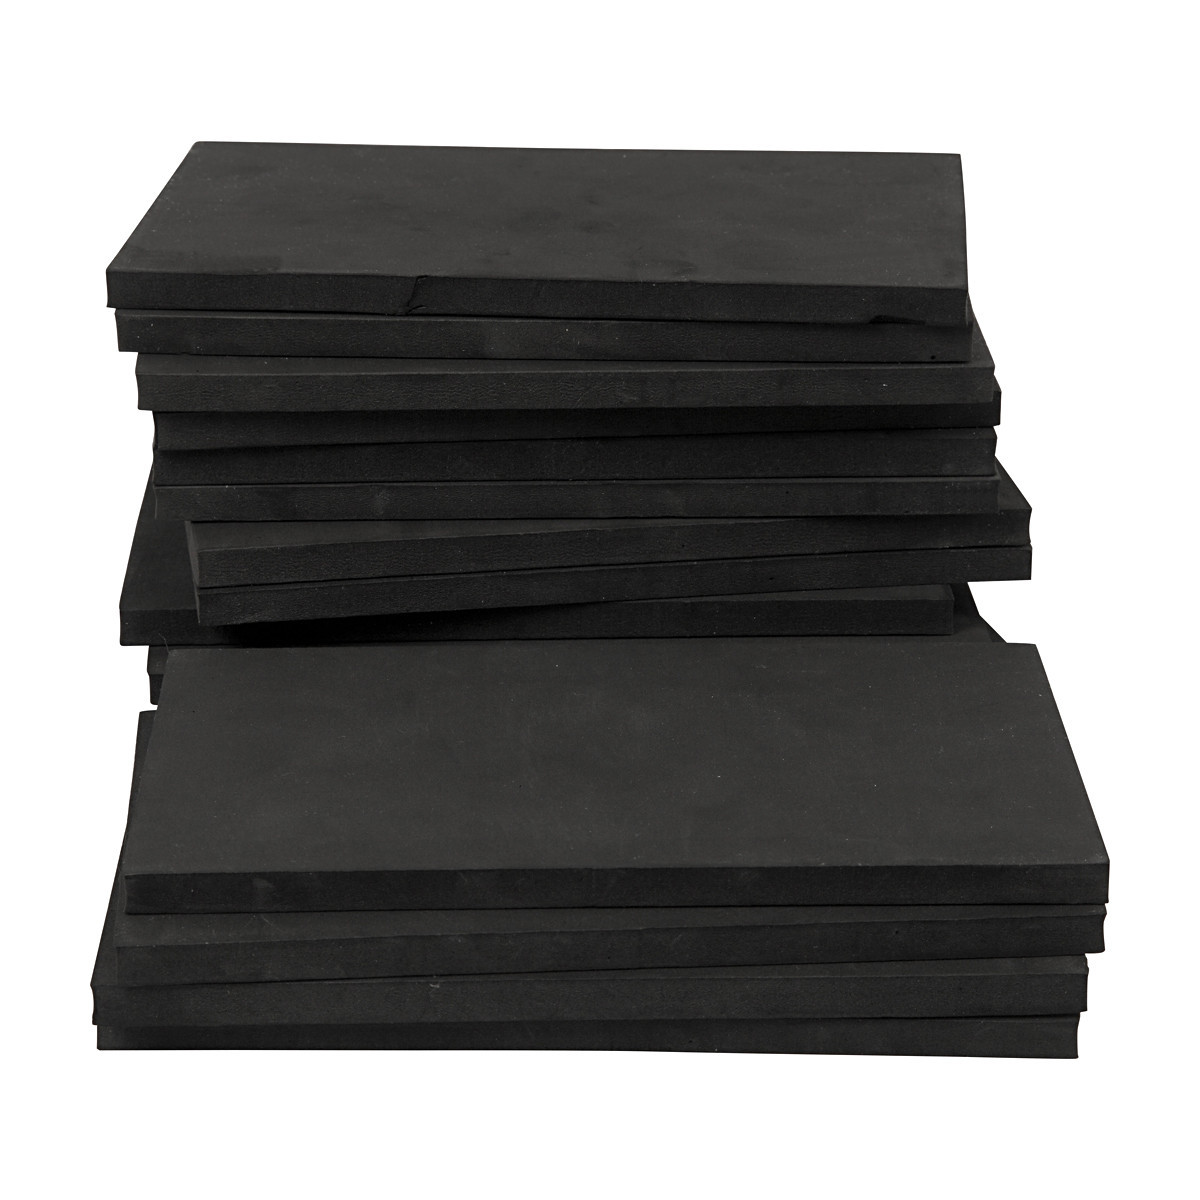 EVA foam plate foam plates for crafting 1-10mm thick